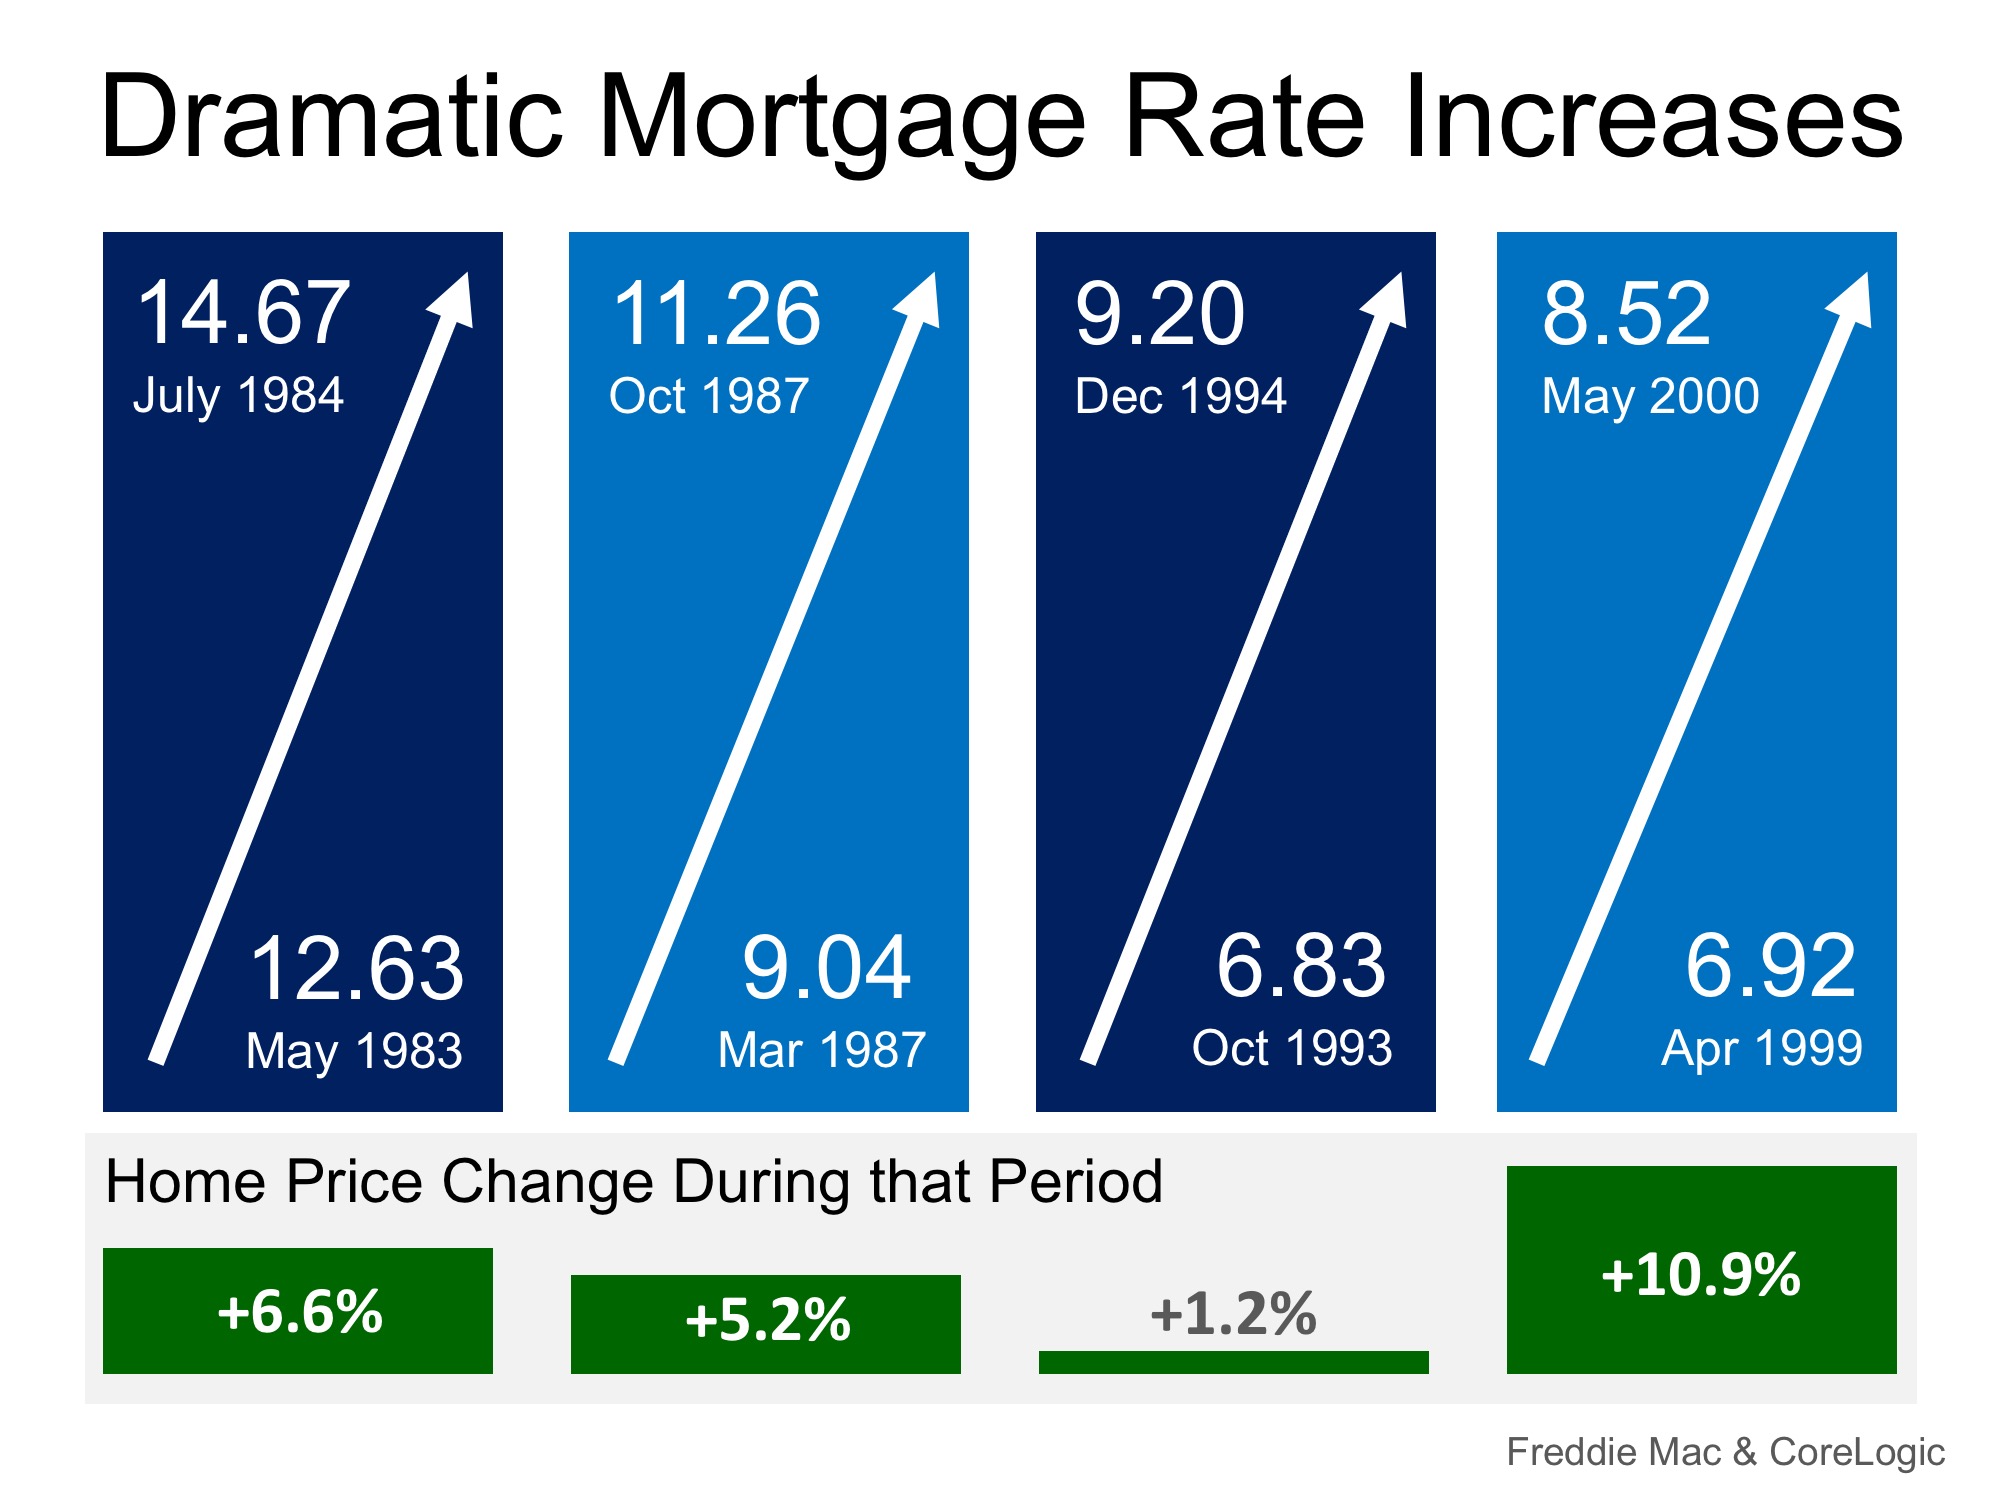 Mortgage Rates on FIRE! Home Prices Up in Smoke? | MyKCM